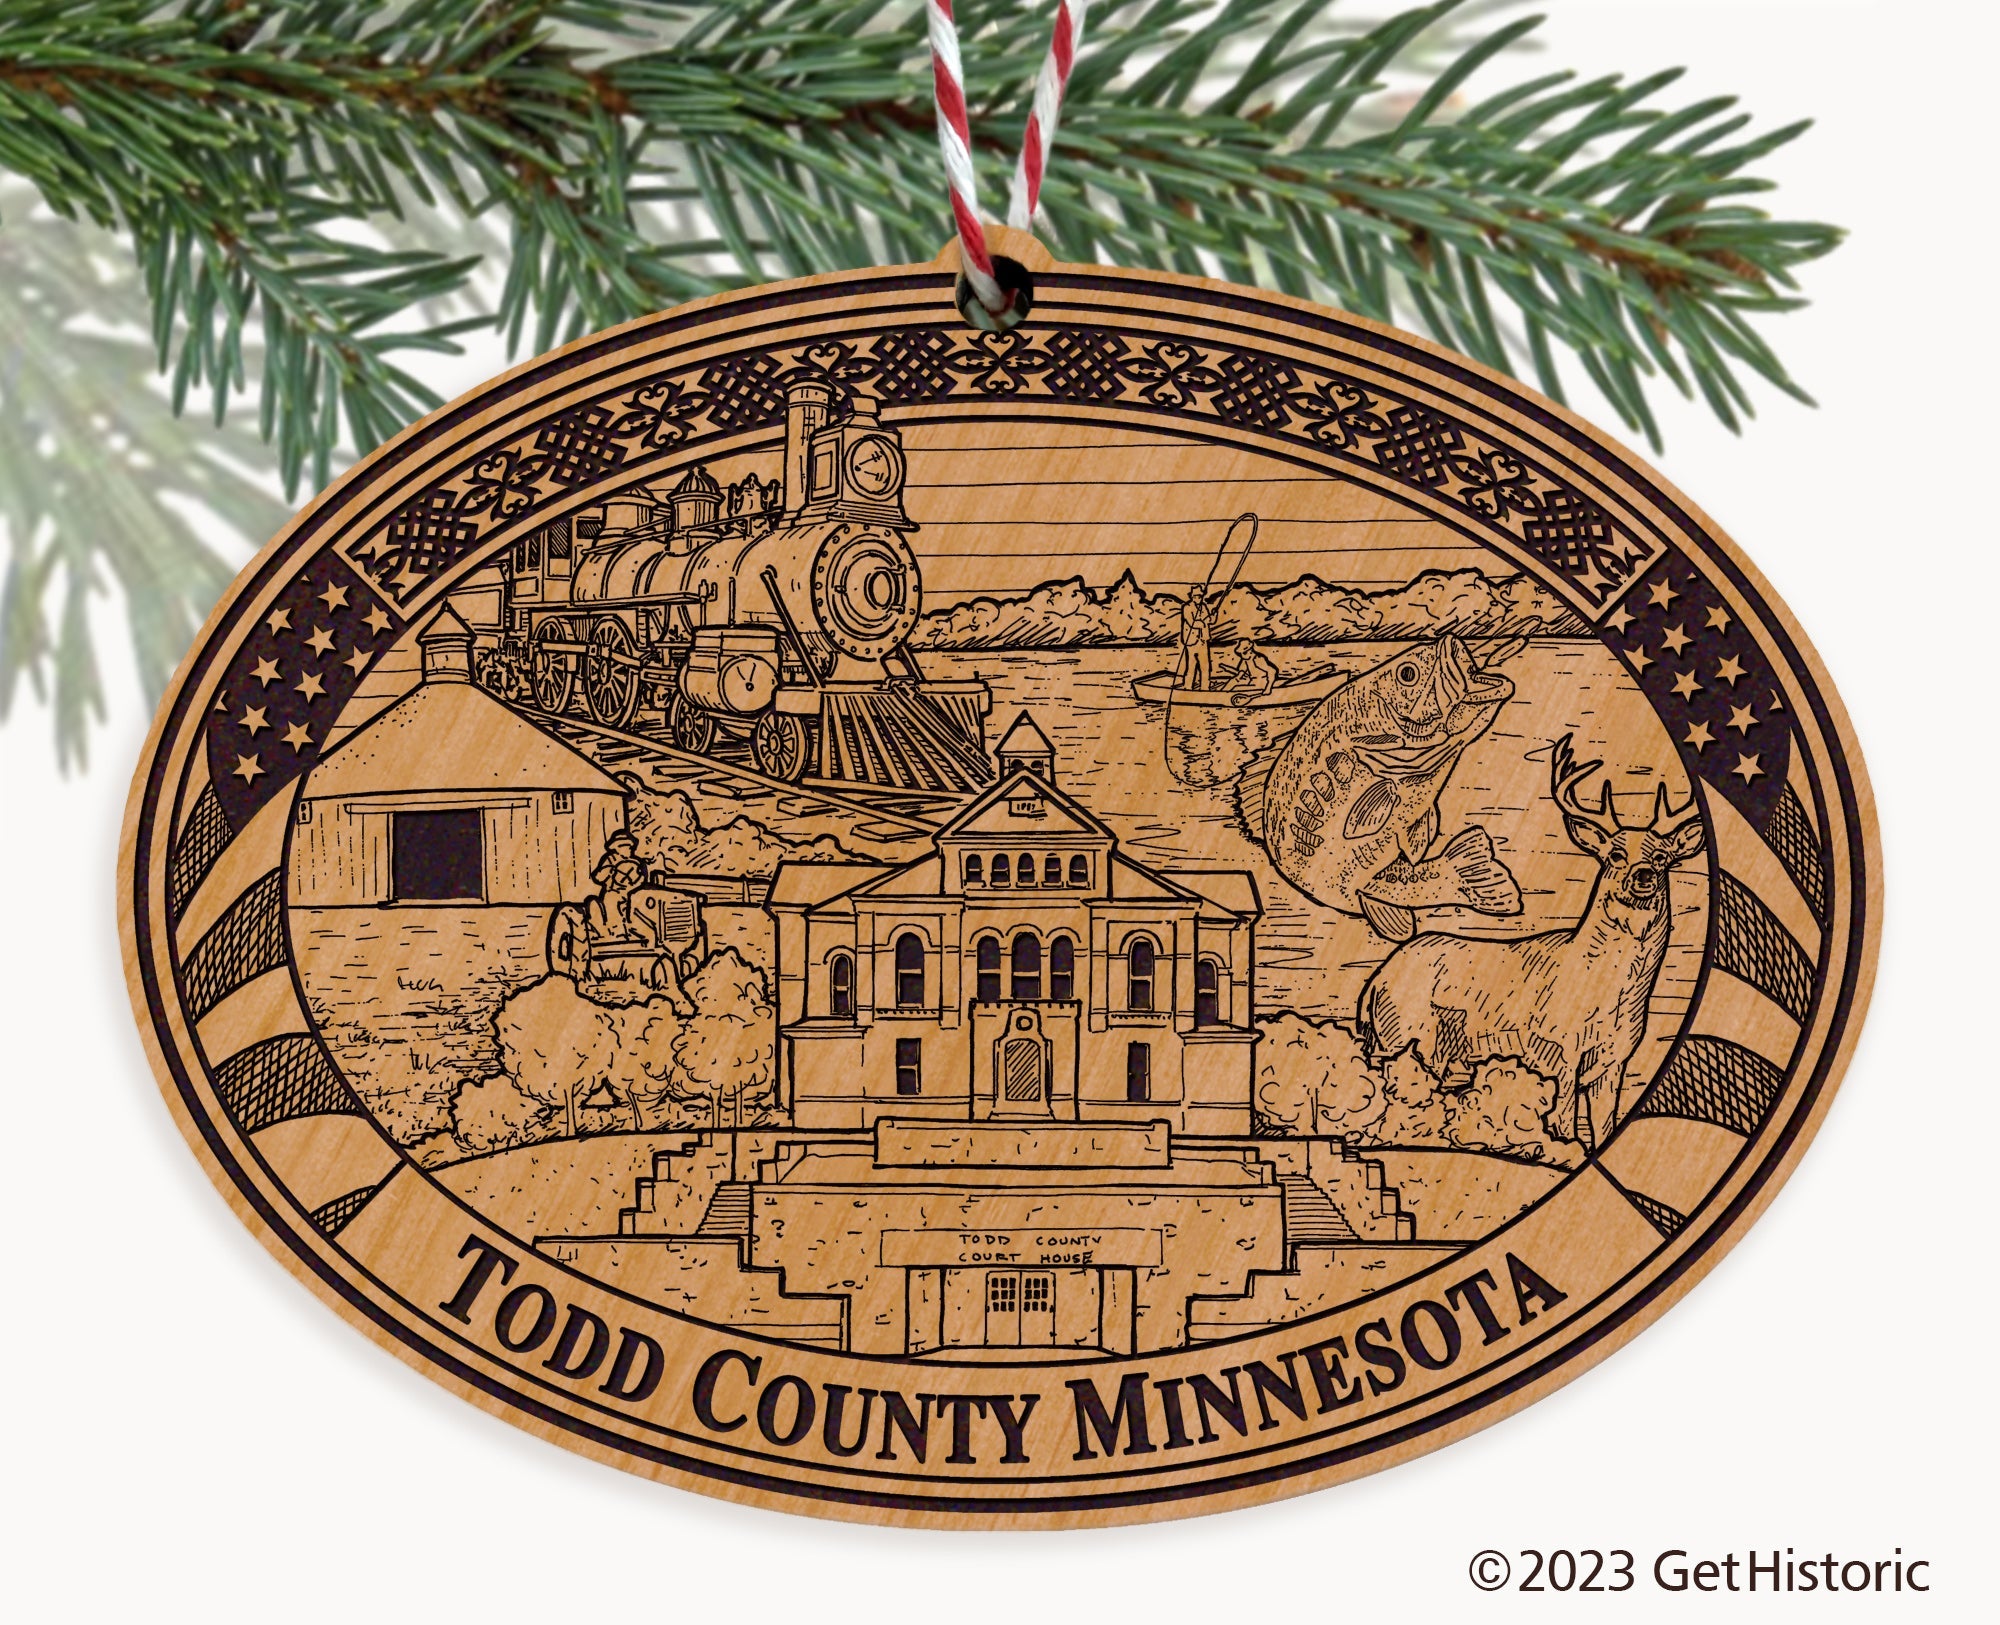 Todd County Minnesota Engraved Natural Ornament